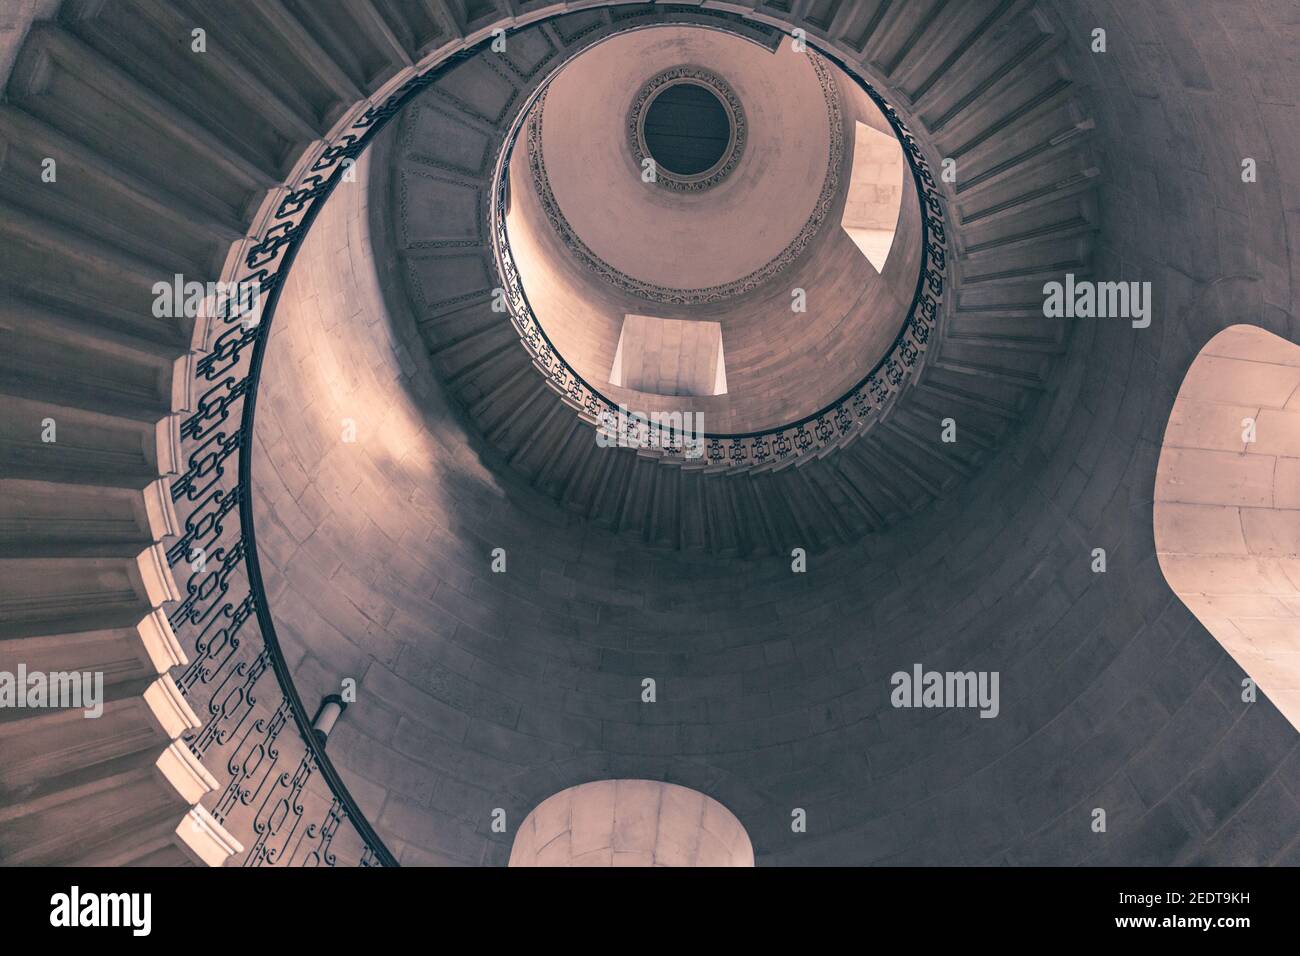 The Dean's Staircase, St Paul's Cathedral, view up spiral stairs made famous as the Divination Stairwell in the Harry Potter films, London UK Stock Photo